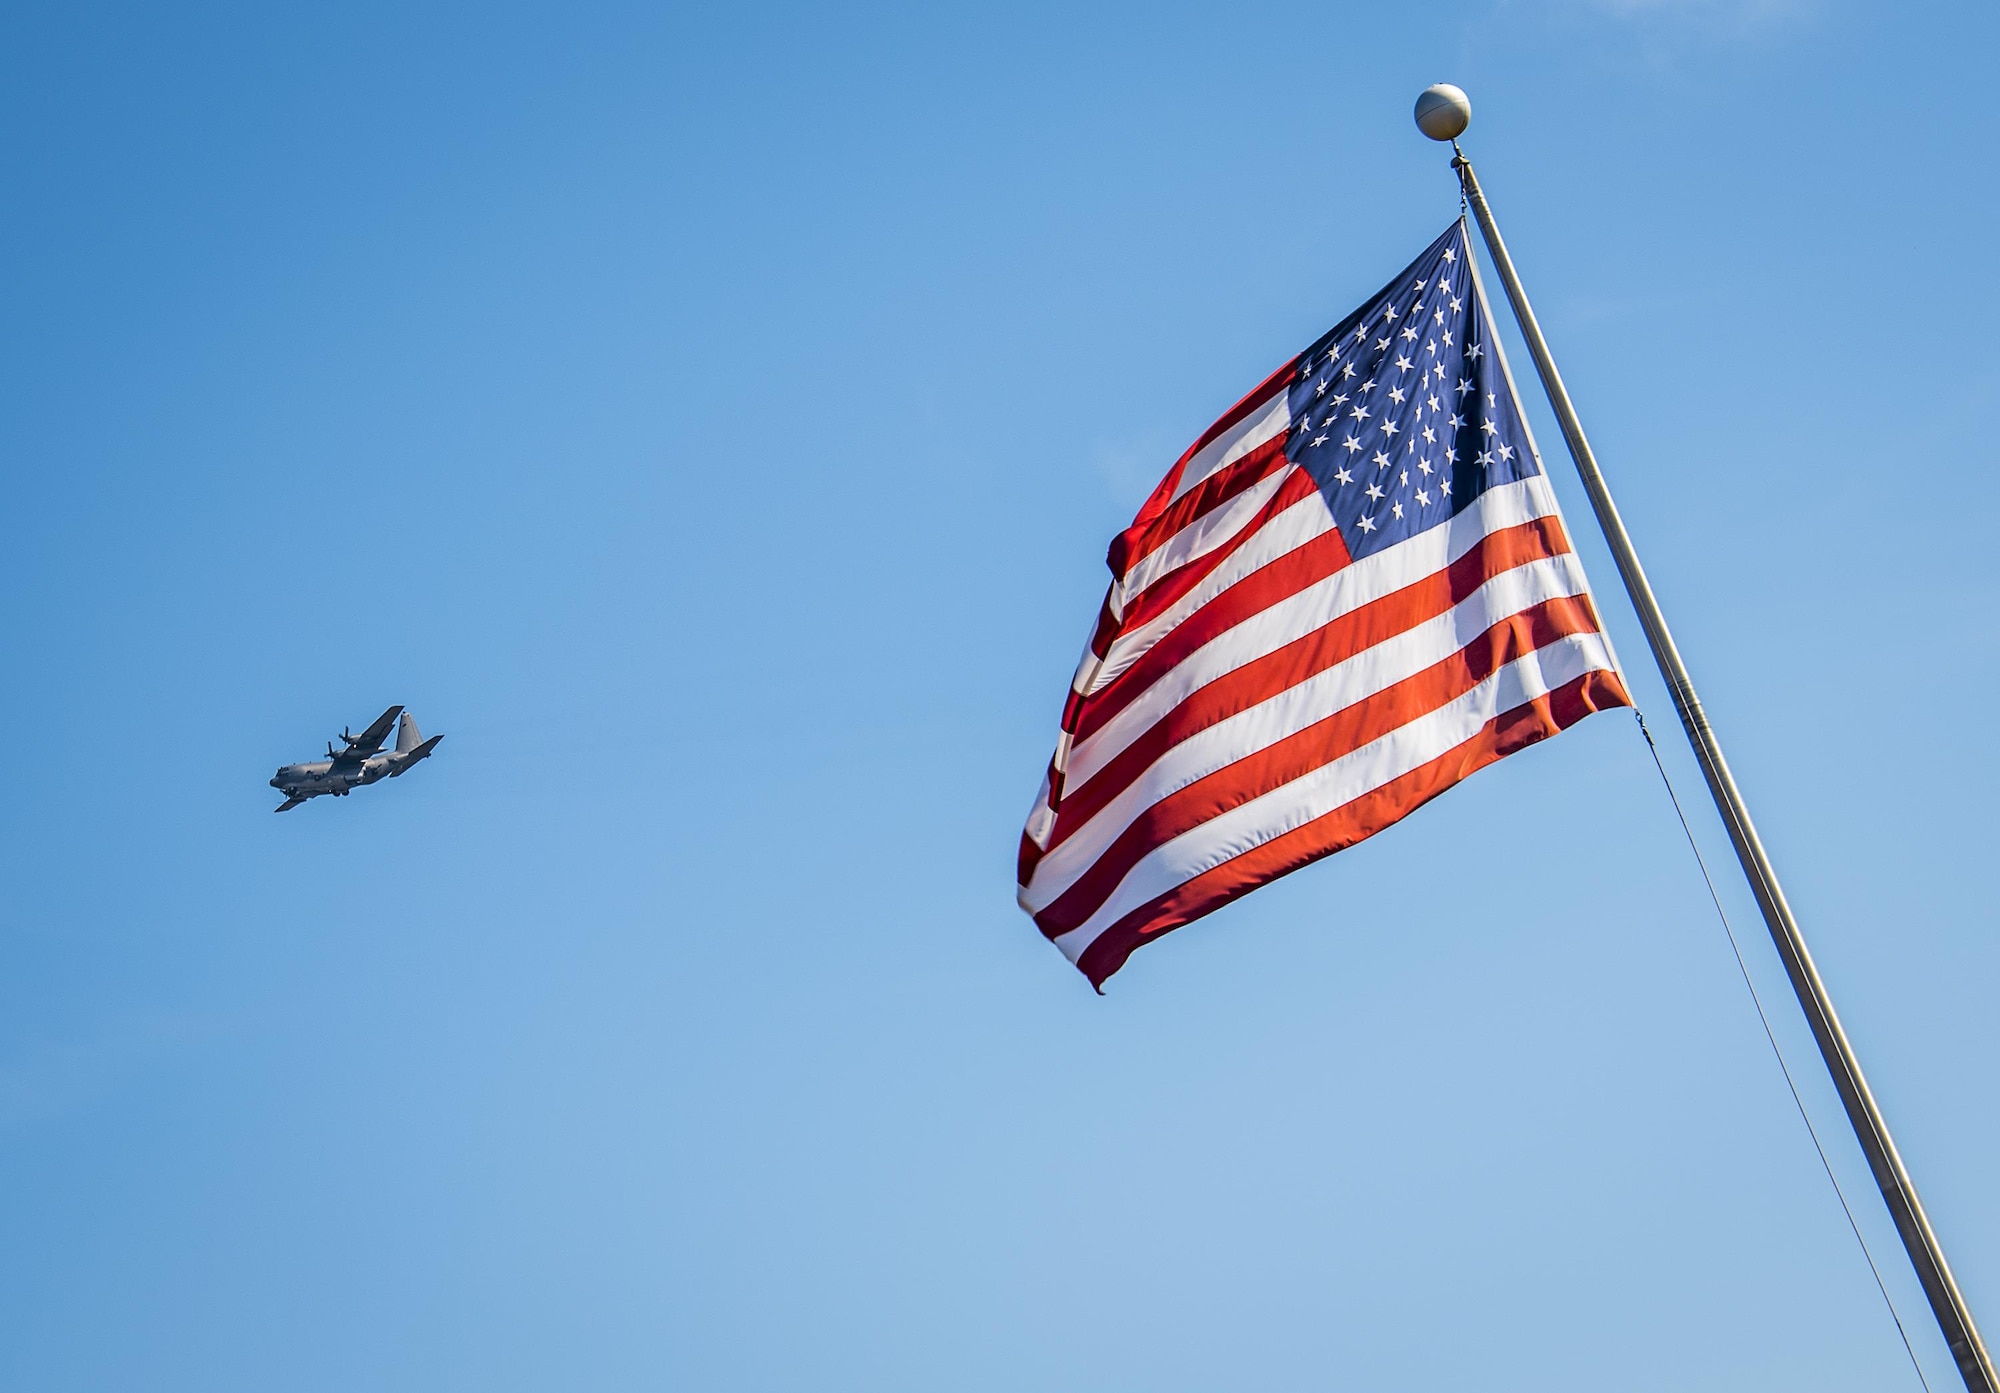 A C-130 flies by the American flag in front of the 96th Test Wing headquarters building at Eglin Air Force Base, Fla., Nov. 1.  (U.S. Air Force photo/Samuel King Jr.)